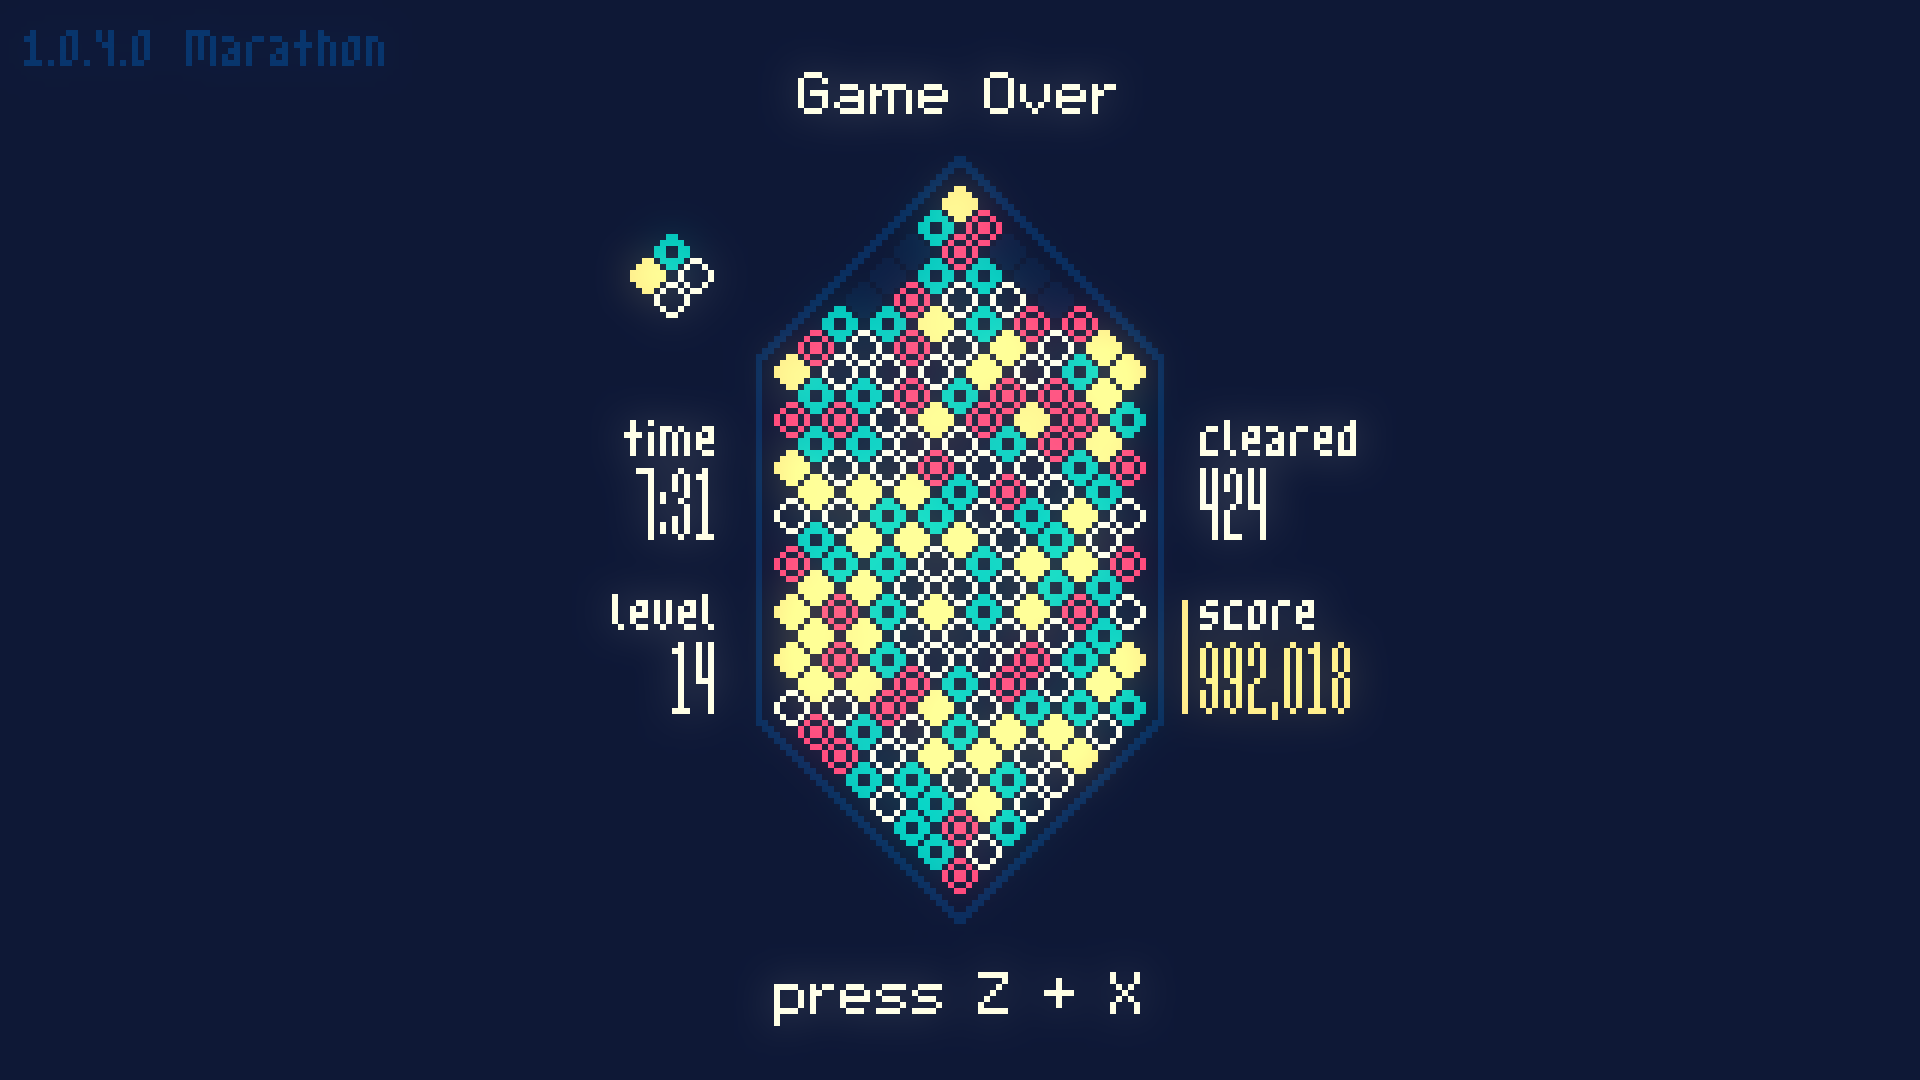 A game over screen for Mixolumia where the screen has been filled by the yellow, red and green blocks. Thetime was 7:31 minutes and they cleared 424 blocks.